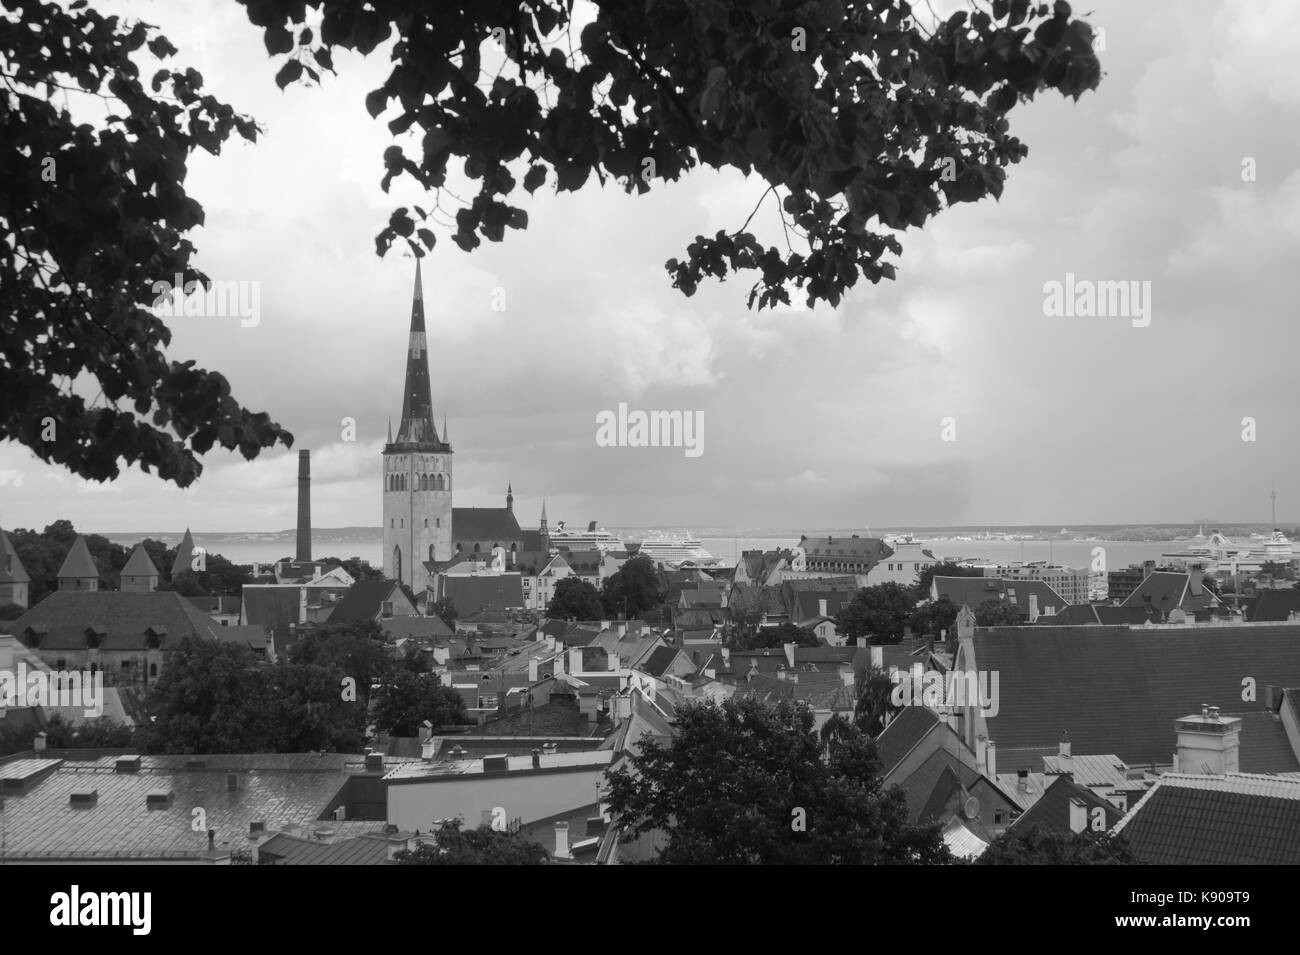 Cityscape with old castle towes of Tallinn Estonia Stock Photo